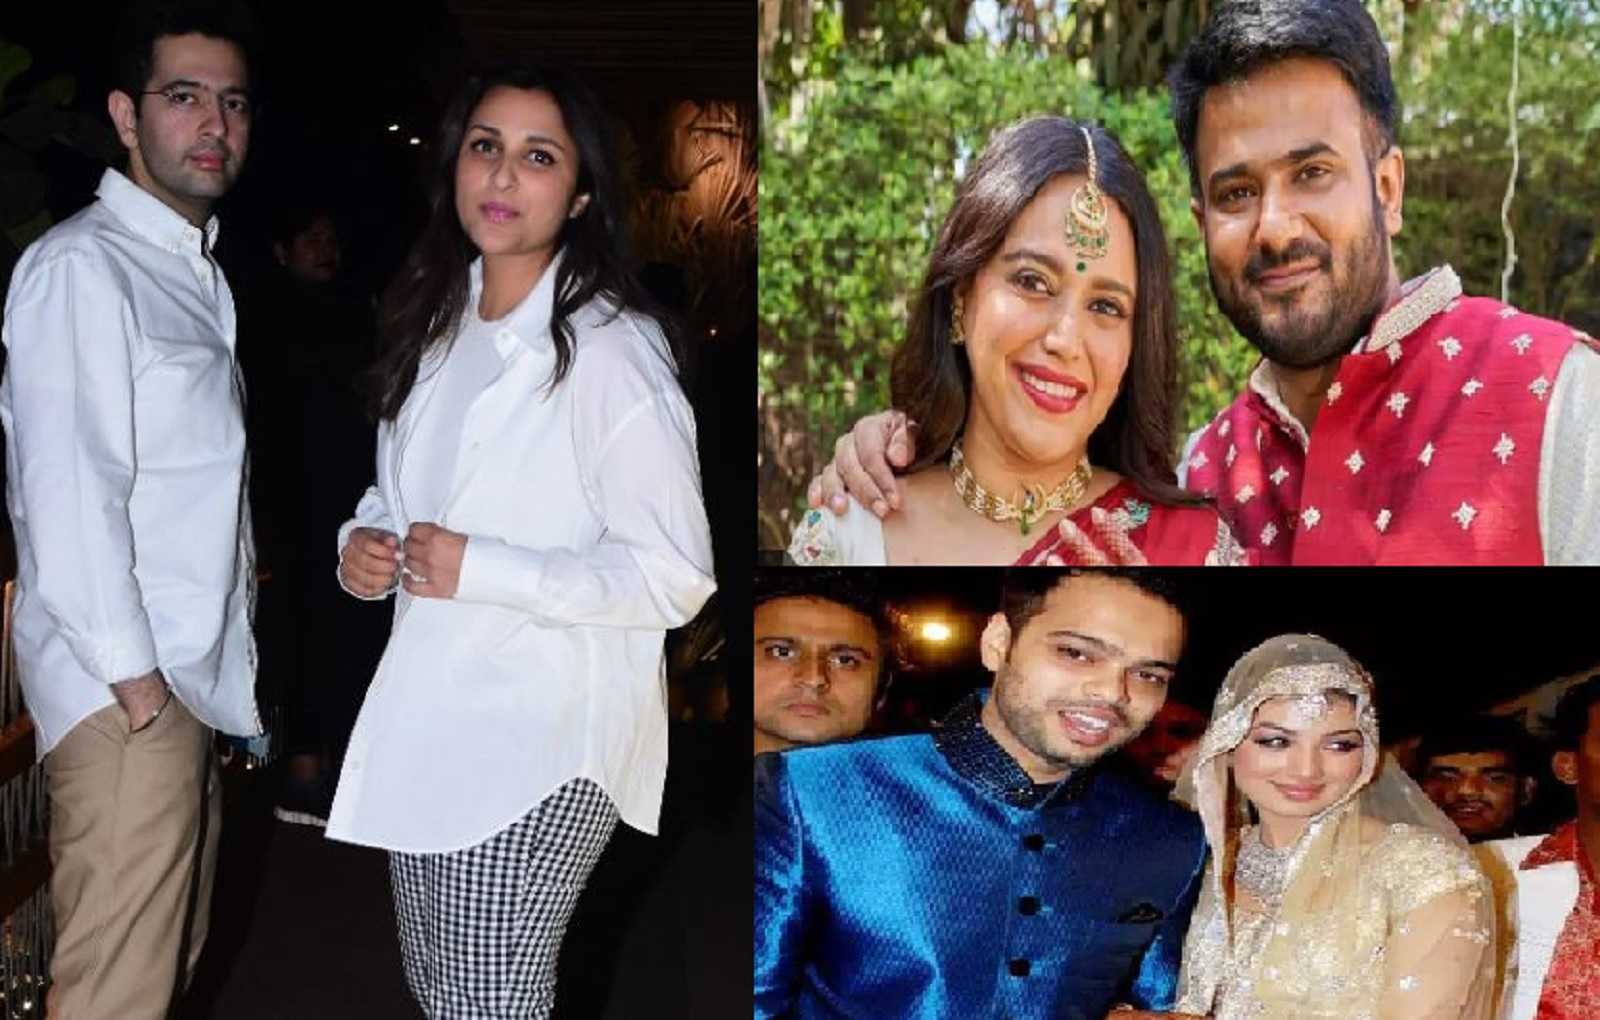 Amid Parineeti Chopra and Raghav Chadha's dating rumours, take a look at actresses who got married to politicians